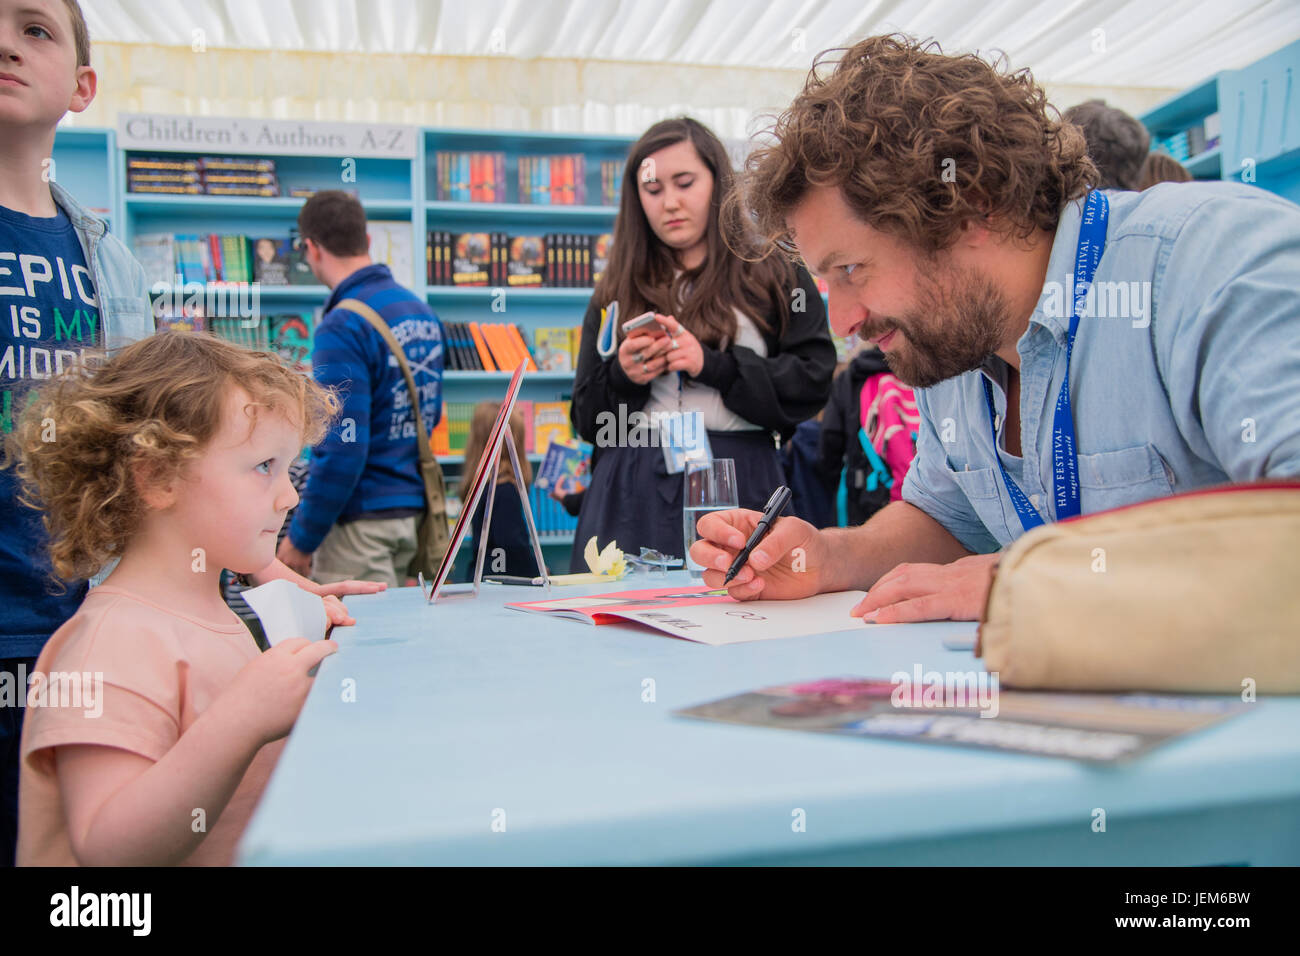 Ed Vere , British writer and illustrator of children's books, appearing at the 2017 Hay Festival of Literature and the Arts, Hay on Wye, Wales UK Stock Photo